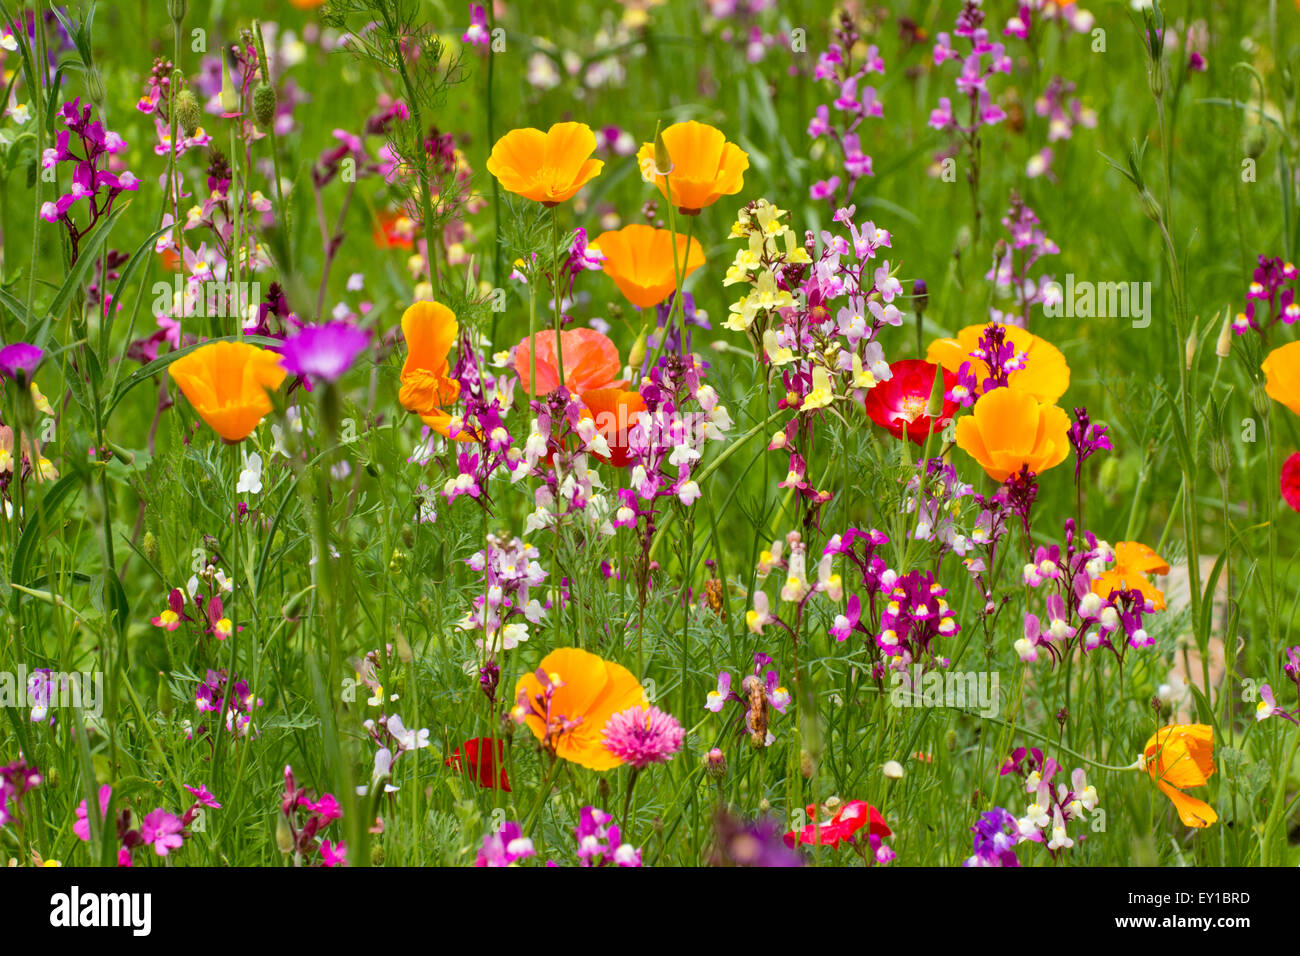 Seed sown annual flowering meadow with Eschscholzia, annual Linaria and Shirley poppies on display in mid July Stock Photo